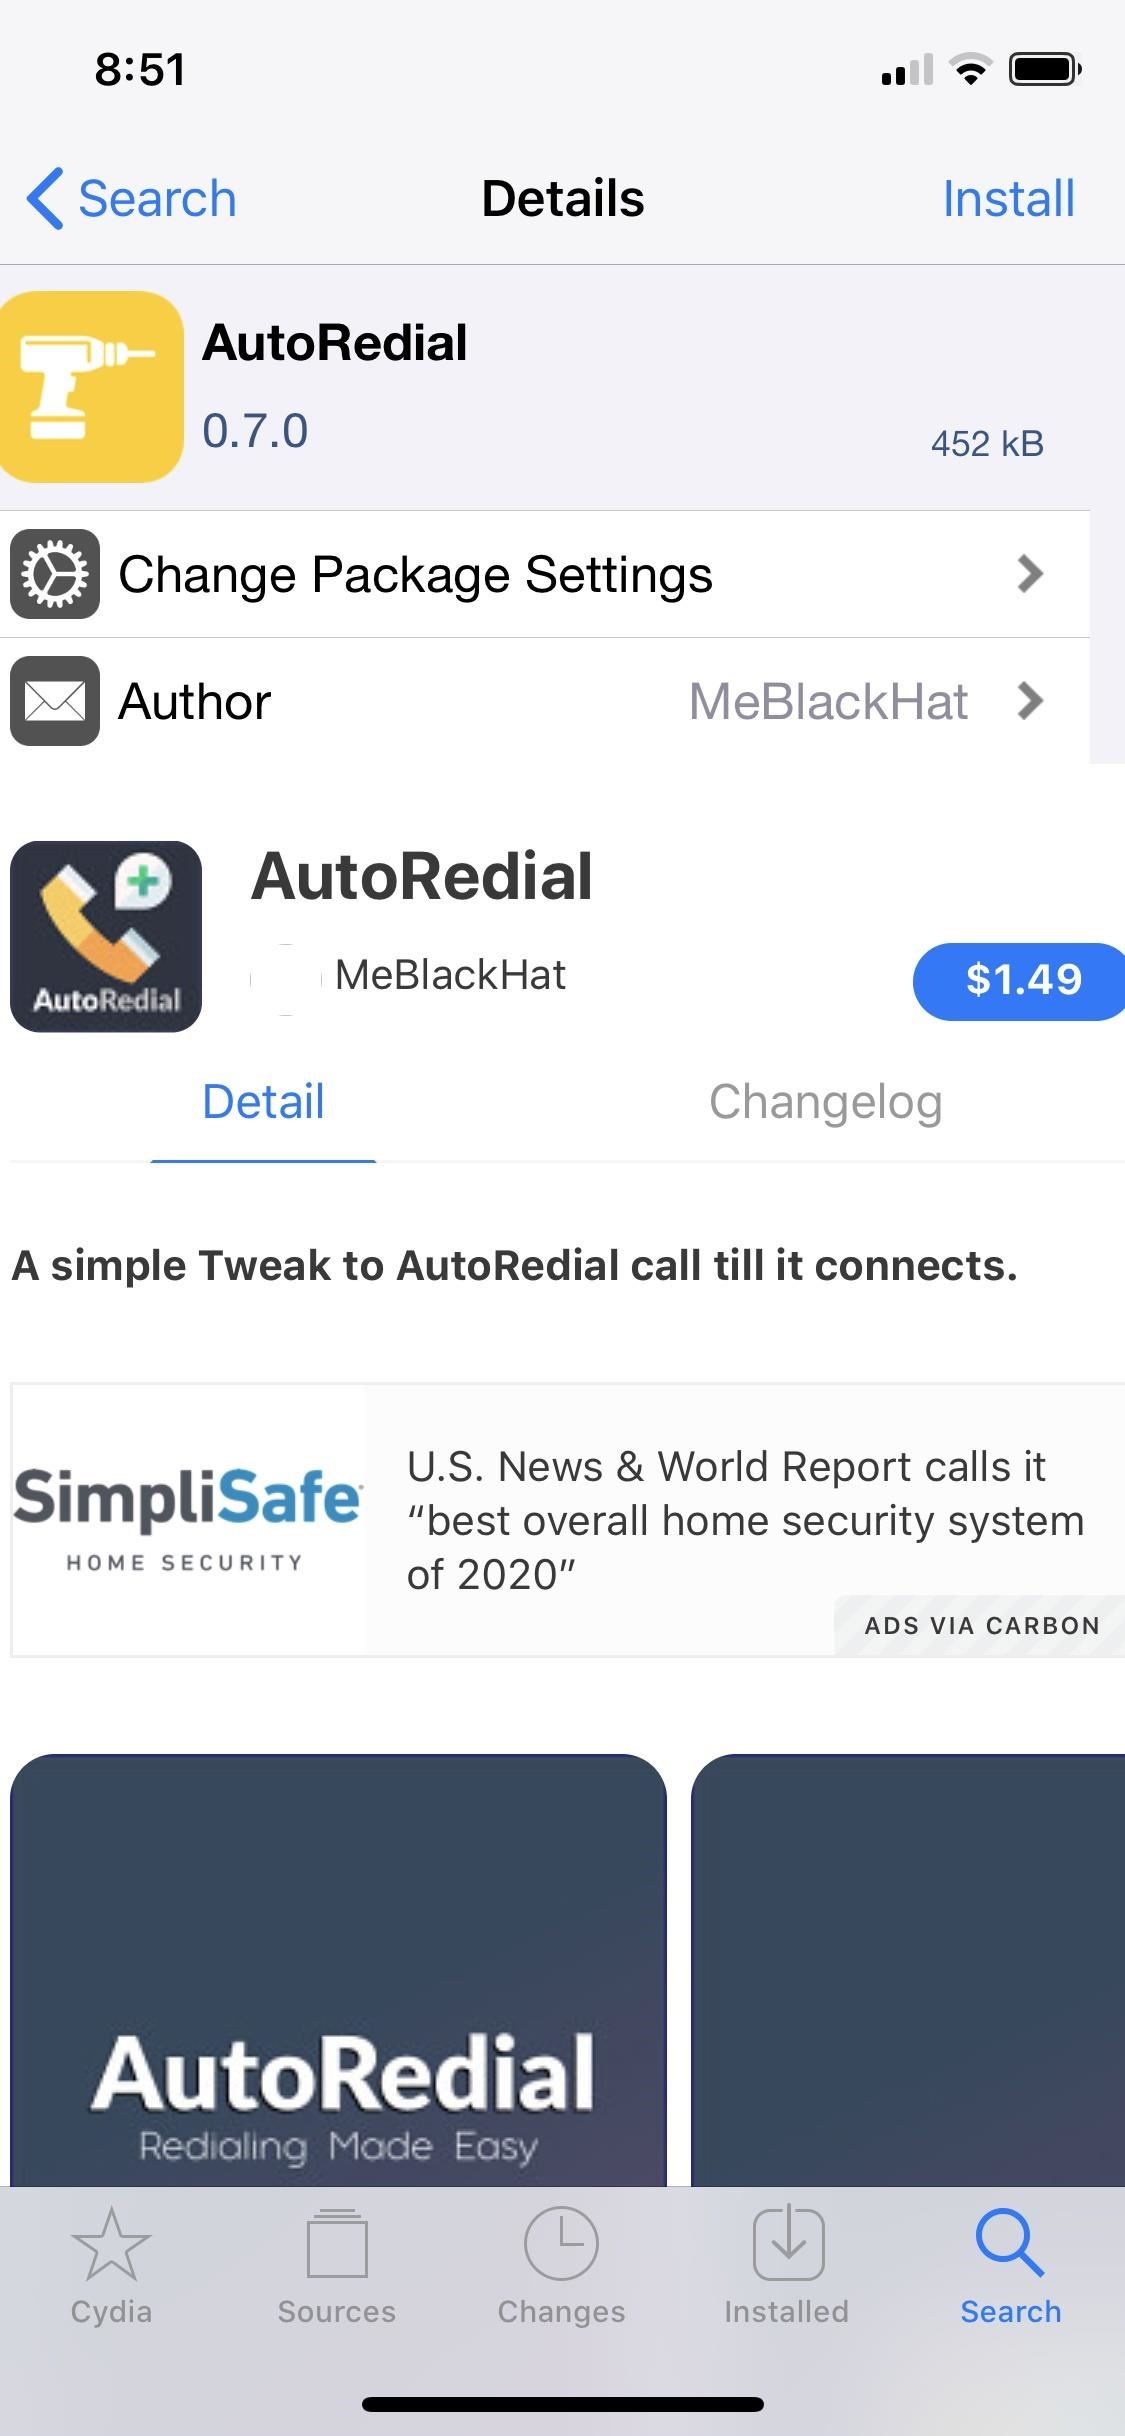 Redial Busy Numbers Automatically on Your iPhone So You Don't Have to Keep Calling & Calling Manually